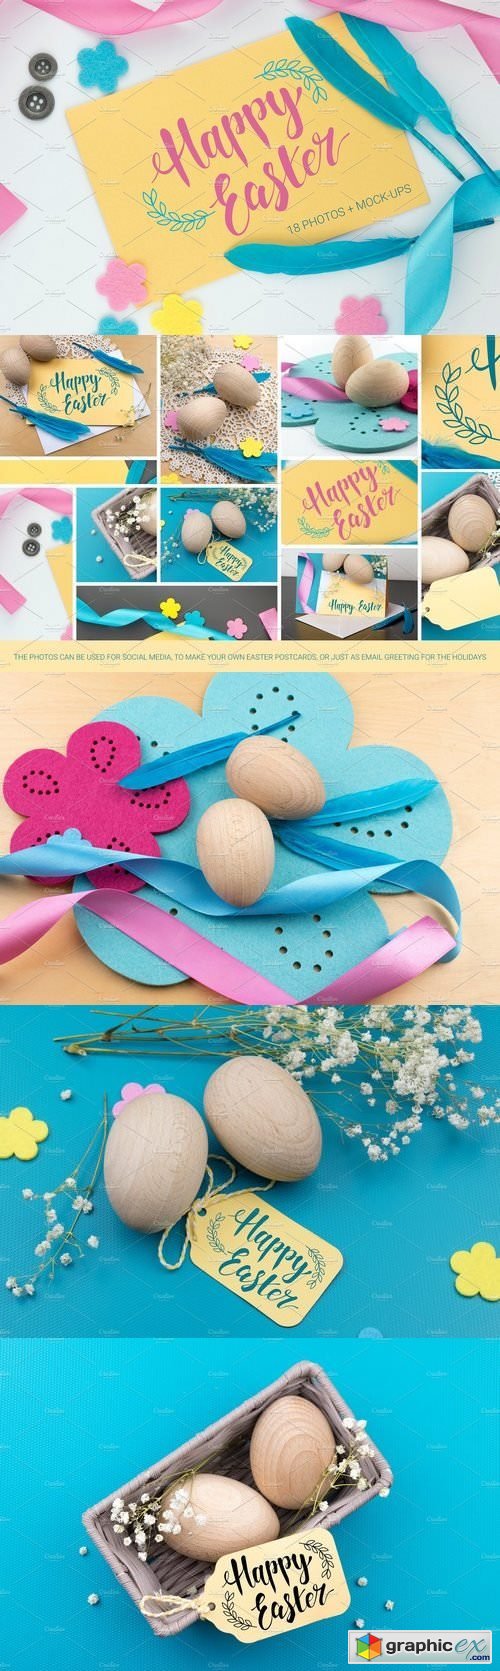 18 Easter photos and mockups